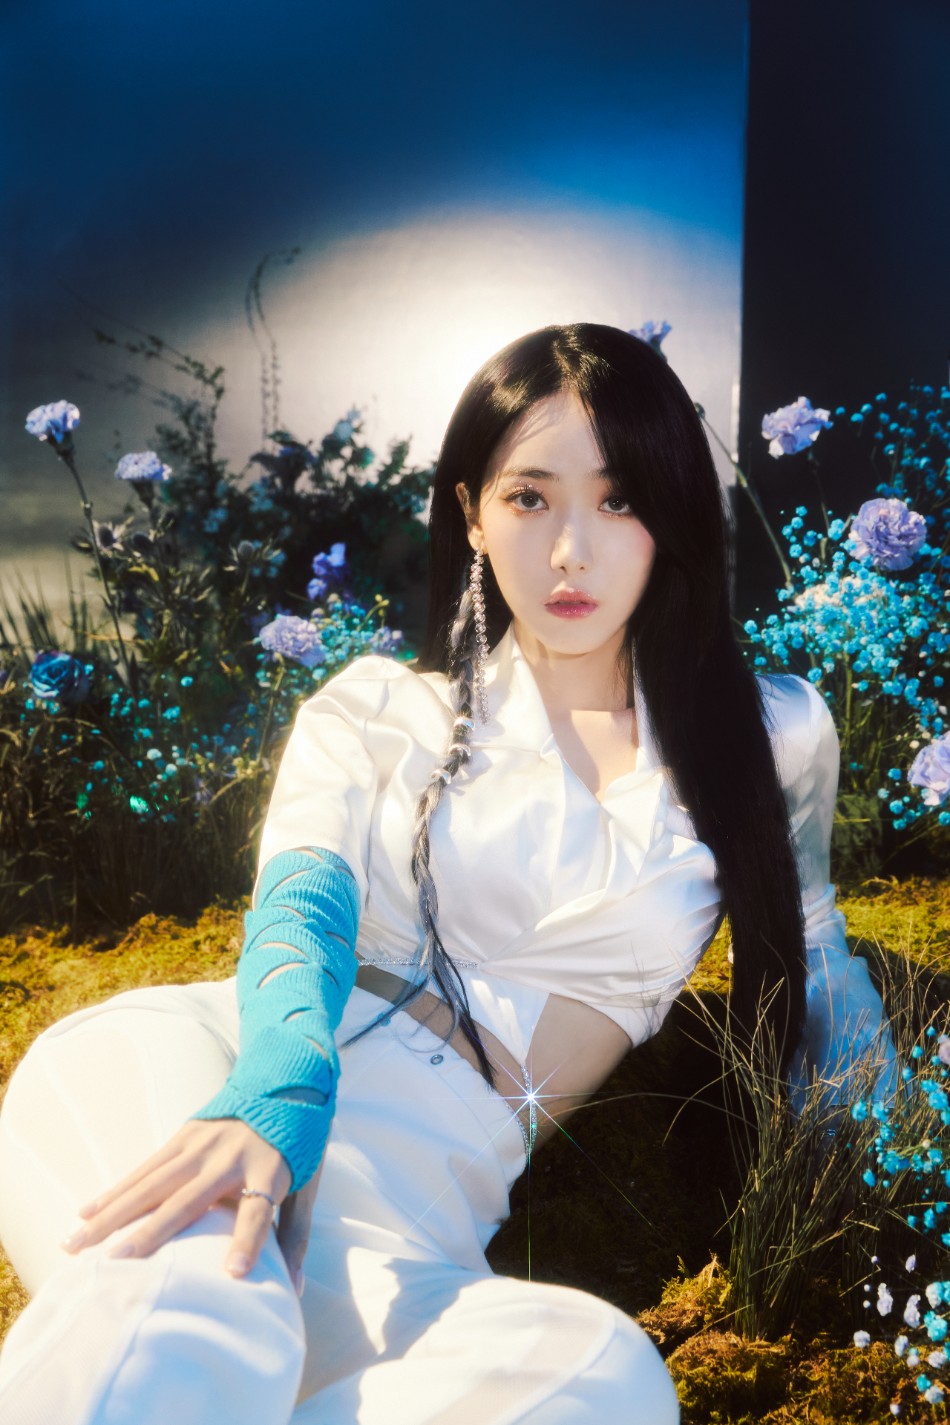 SinB. Photo courtesy of BPM Entertainment and The Unit Label